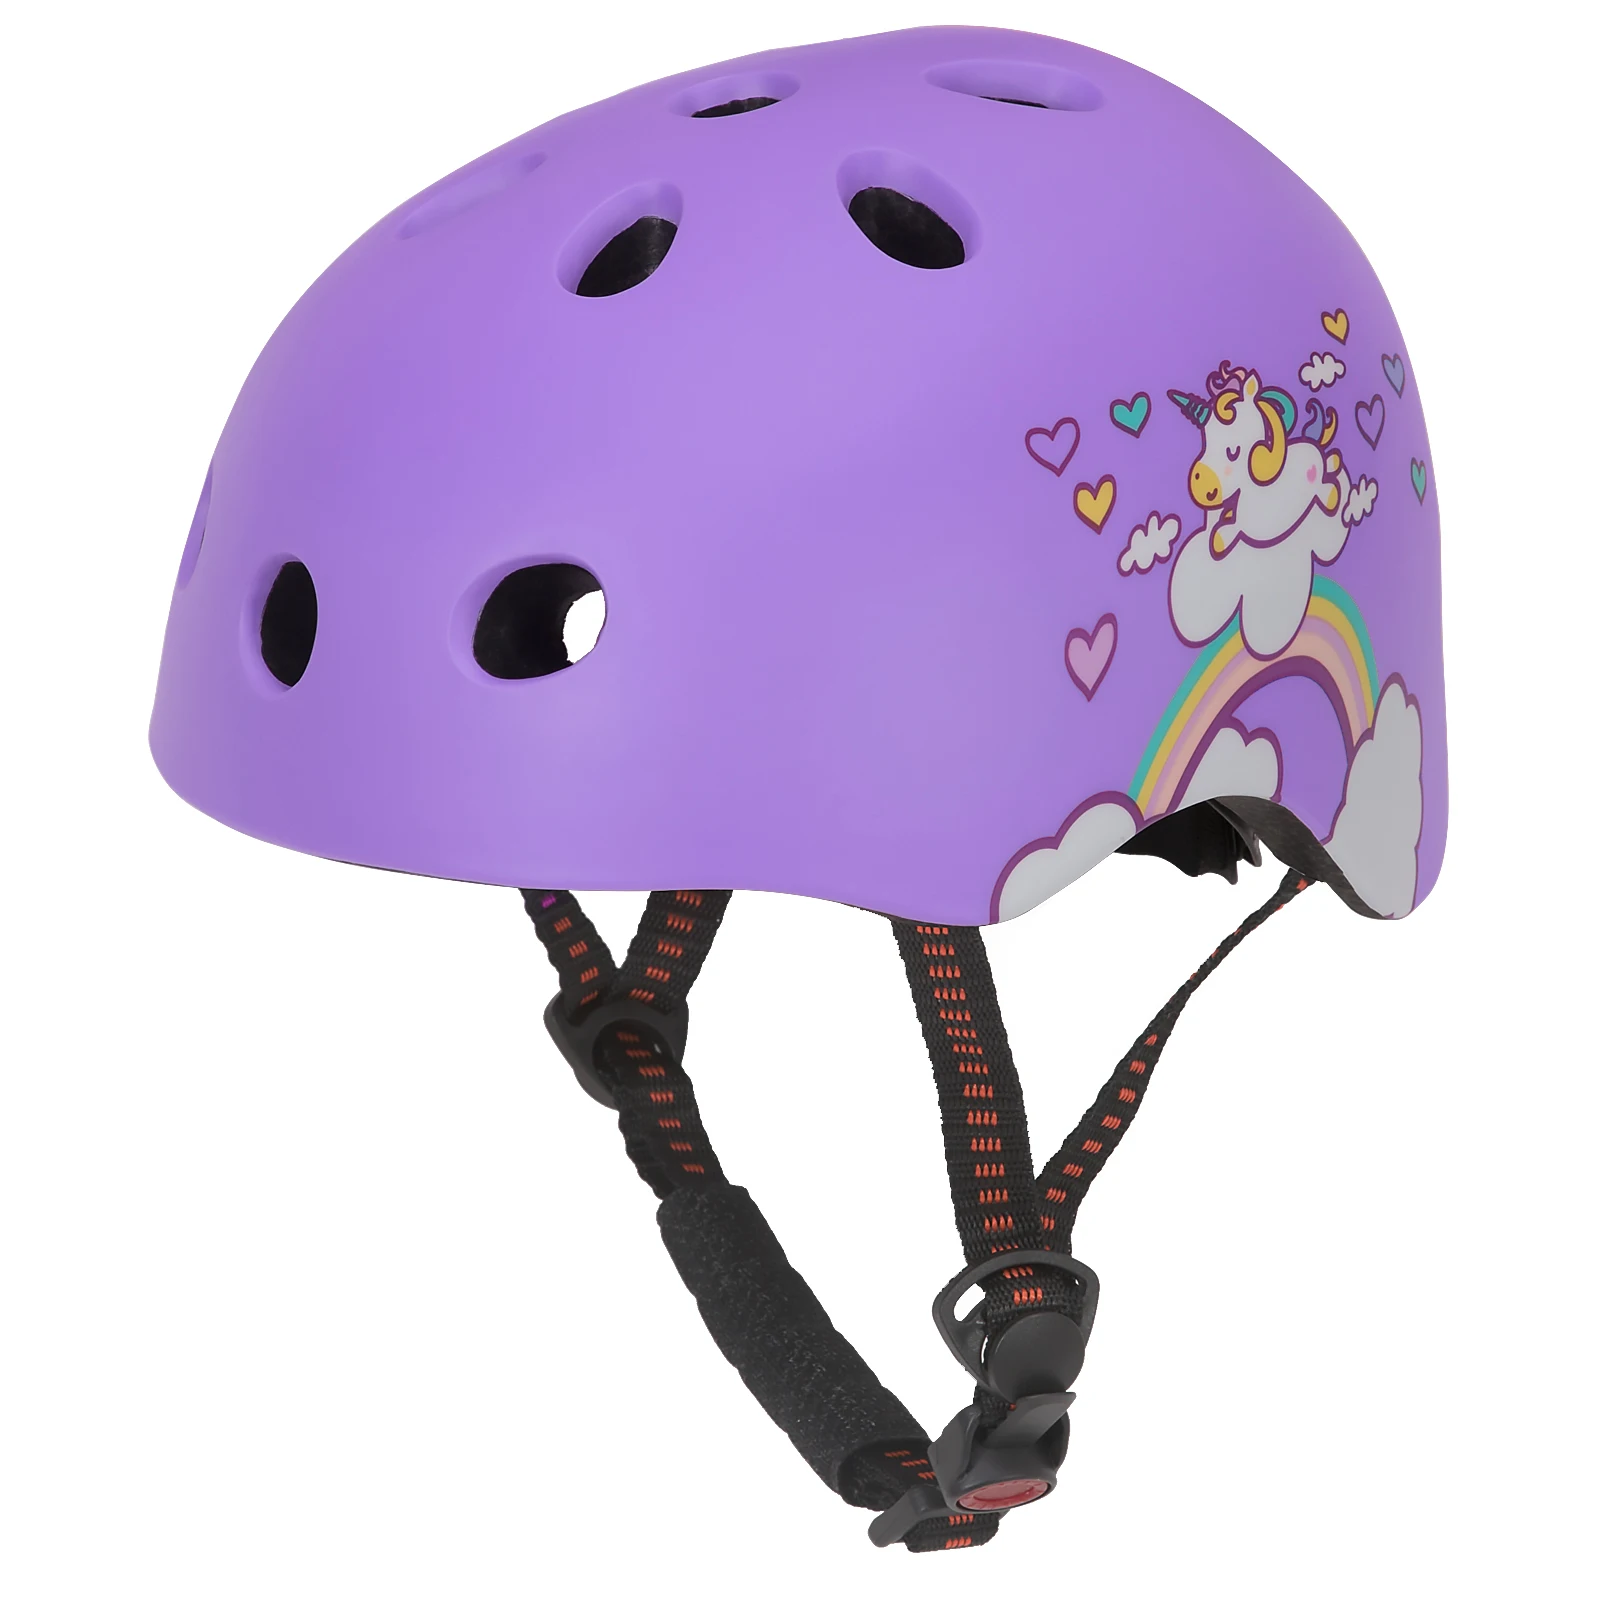 Kids Helmet Bicycle Ultralight 3-6 Years Children's Protective Gear Girls Cycling Riding Helmet Kids Bicycle casco ciclismo cap